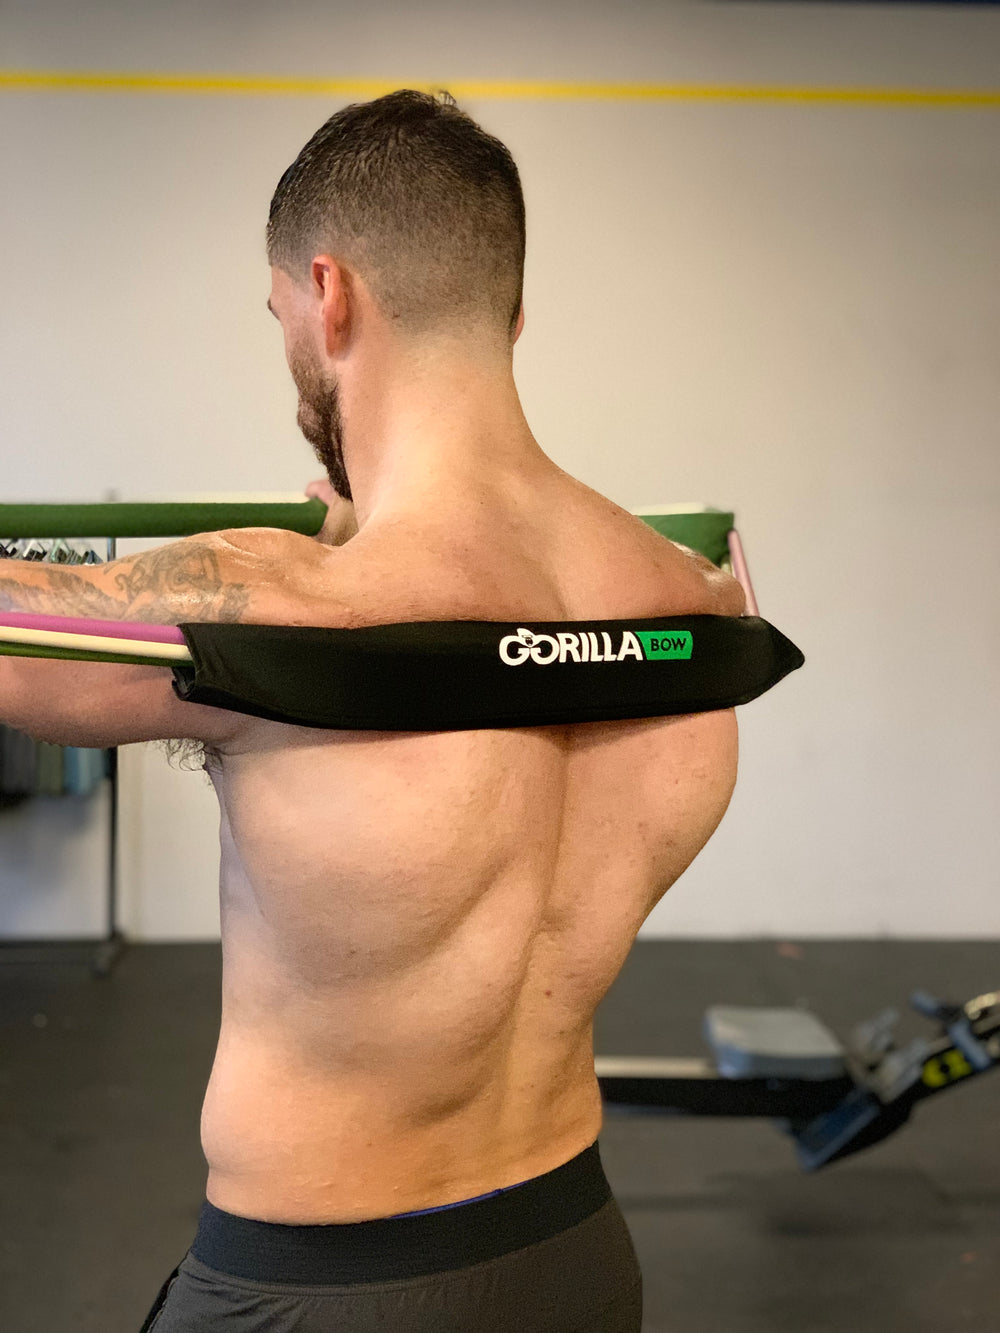 How Many Reps and Sets Should I Do Per Workout? – Gorilla Bow